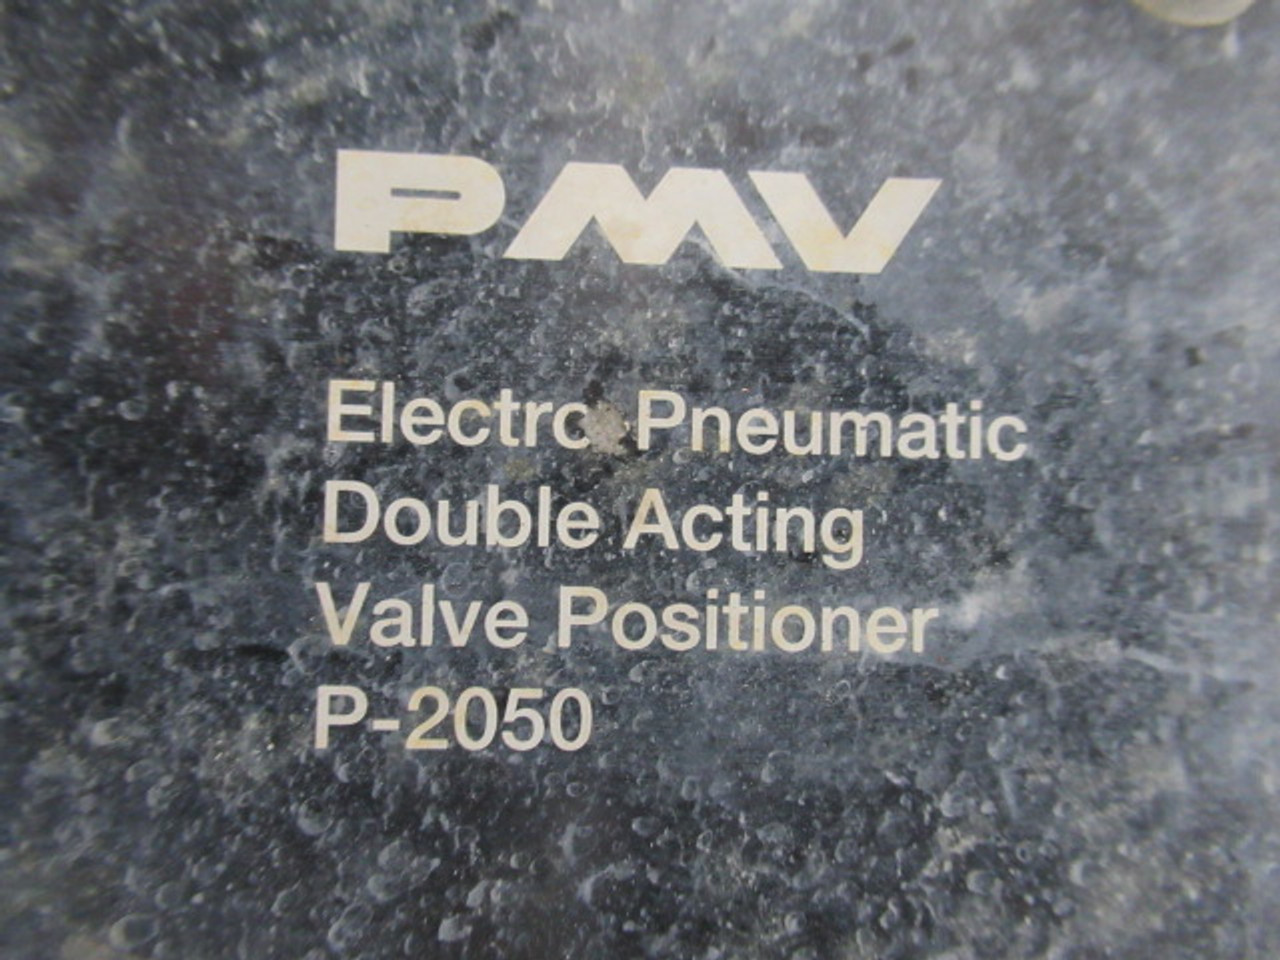 PMV P-2050 Electric Pneumatic Double Action Valve Positioner USED